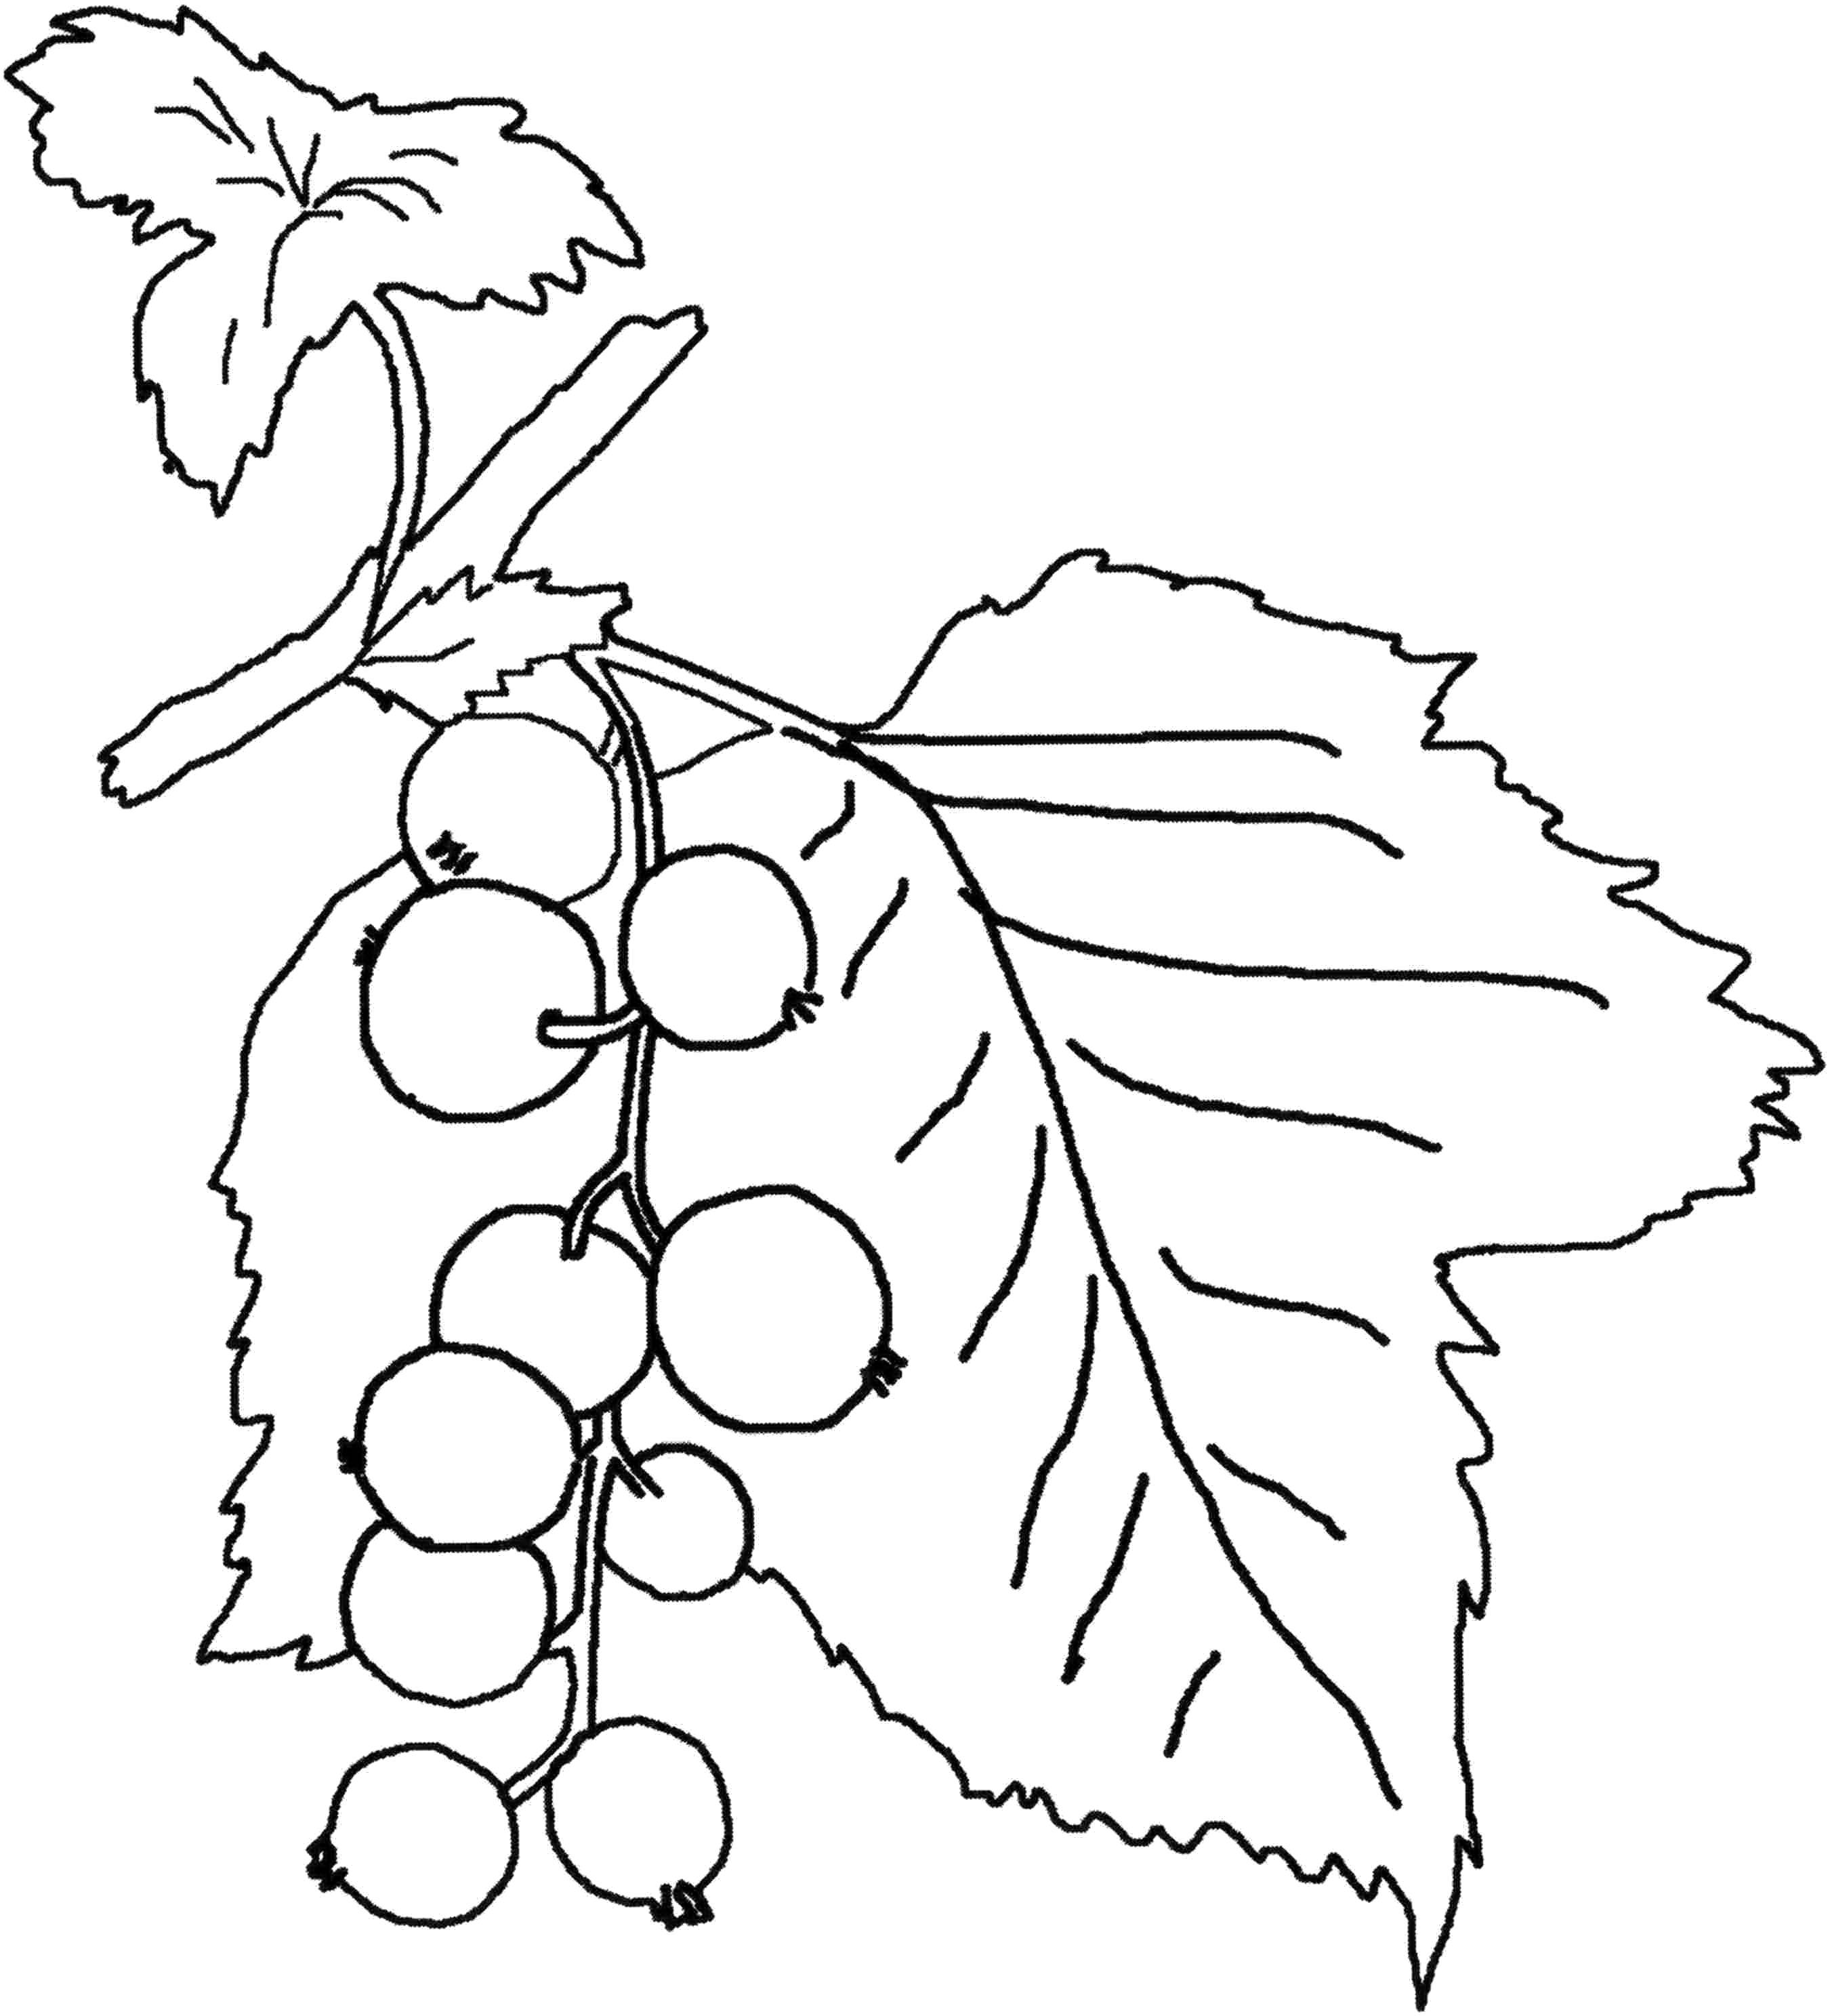 Coloring Currants. Category berries. Tags:  Berries, currants.